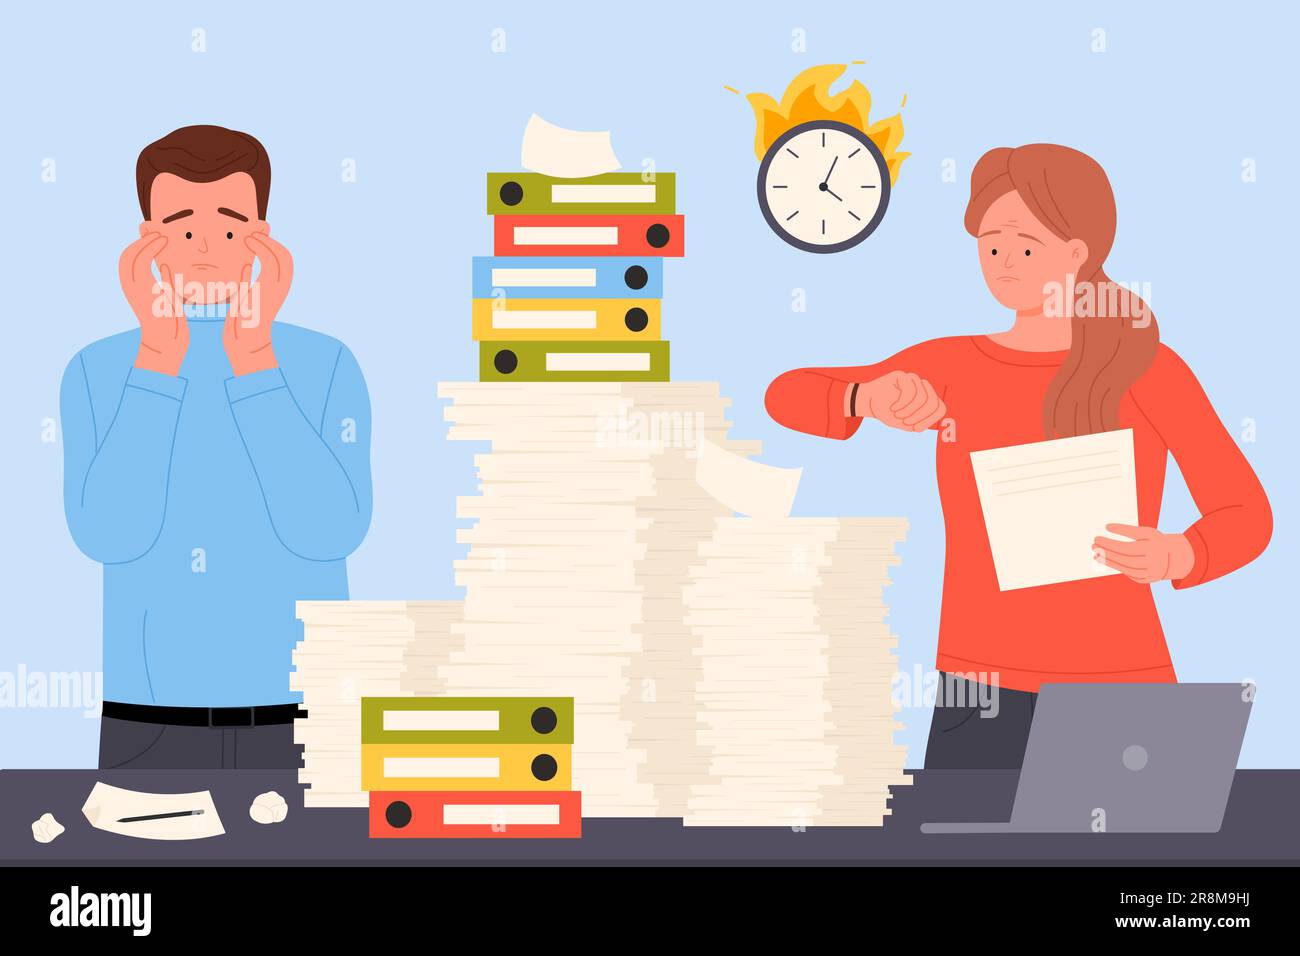 Bureaucracy, employee stress from lot of paperwork vector illustration. Cartoon tired exhausted woman and man late for deadline, office workers standing near table with pile of paper documents, laptop Stock Vector